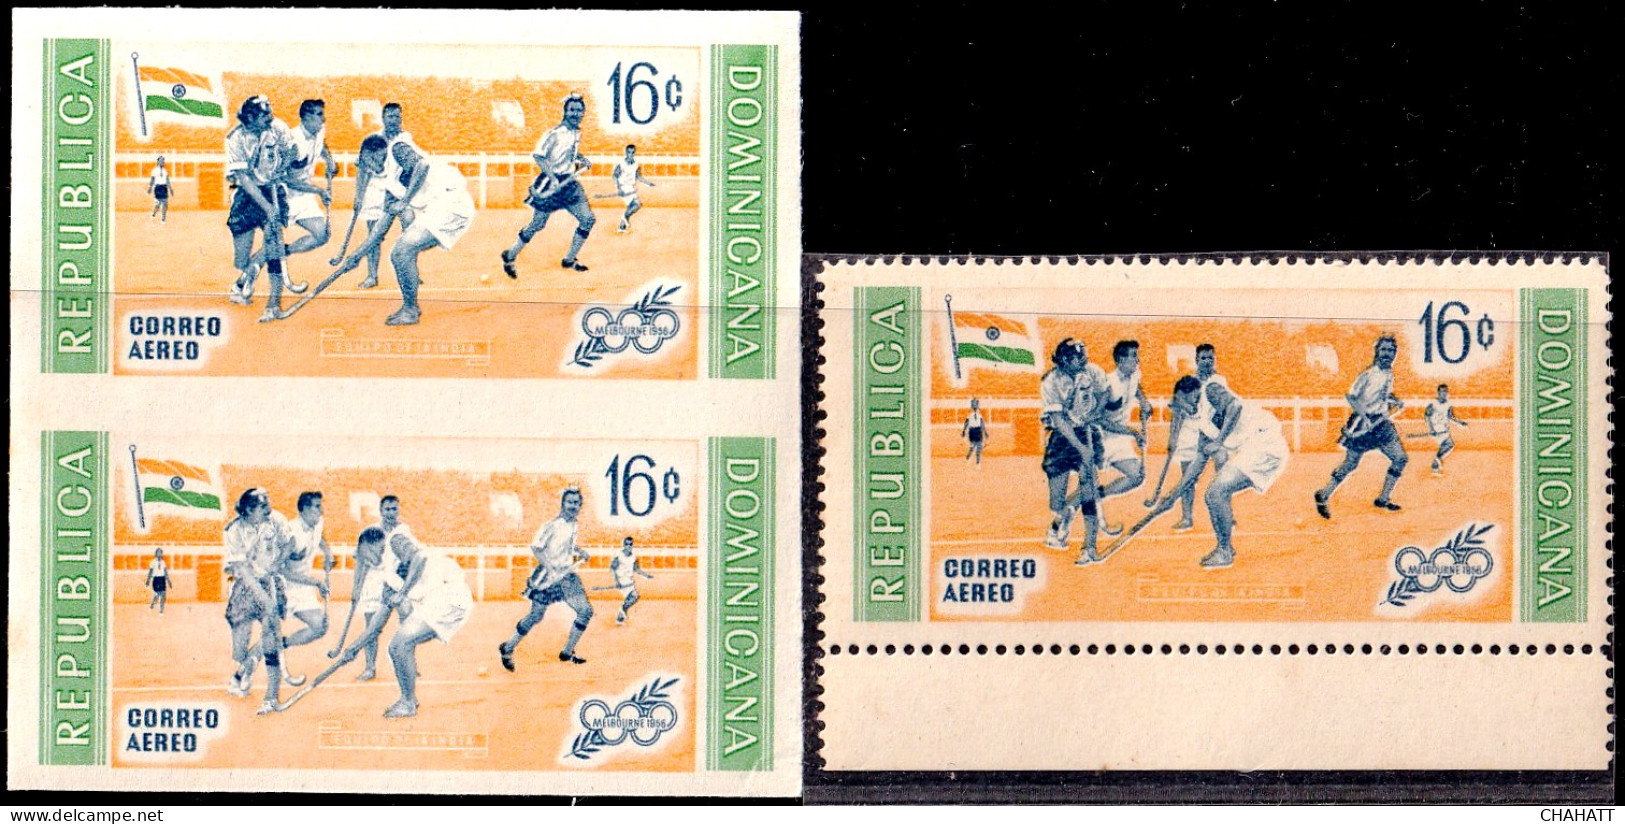 FIELD HOCKEY--OLYMPICS-1956-IMPERF PAIR WITH A NORMAL STAMP-COLOR VARIETY- DOMINICANA-MNH- SCARCE- A5-745 - Jockey (sobre Hierba)